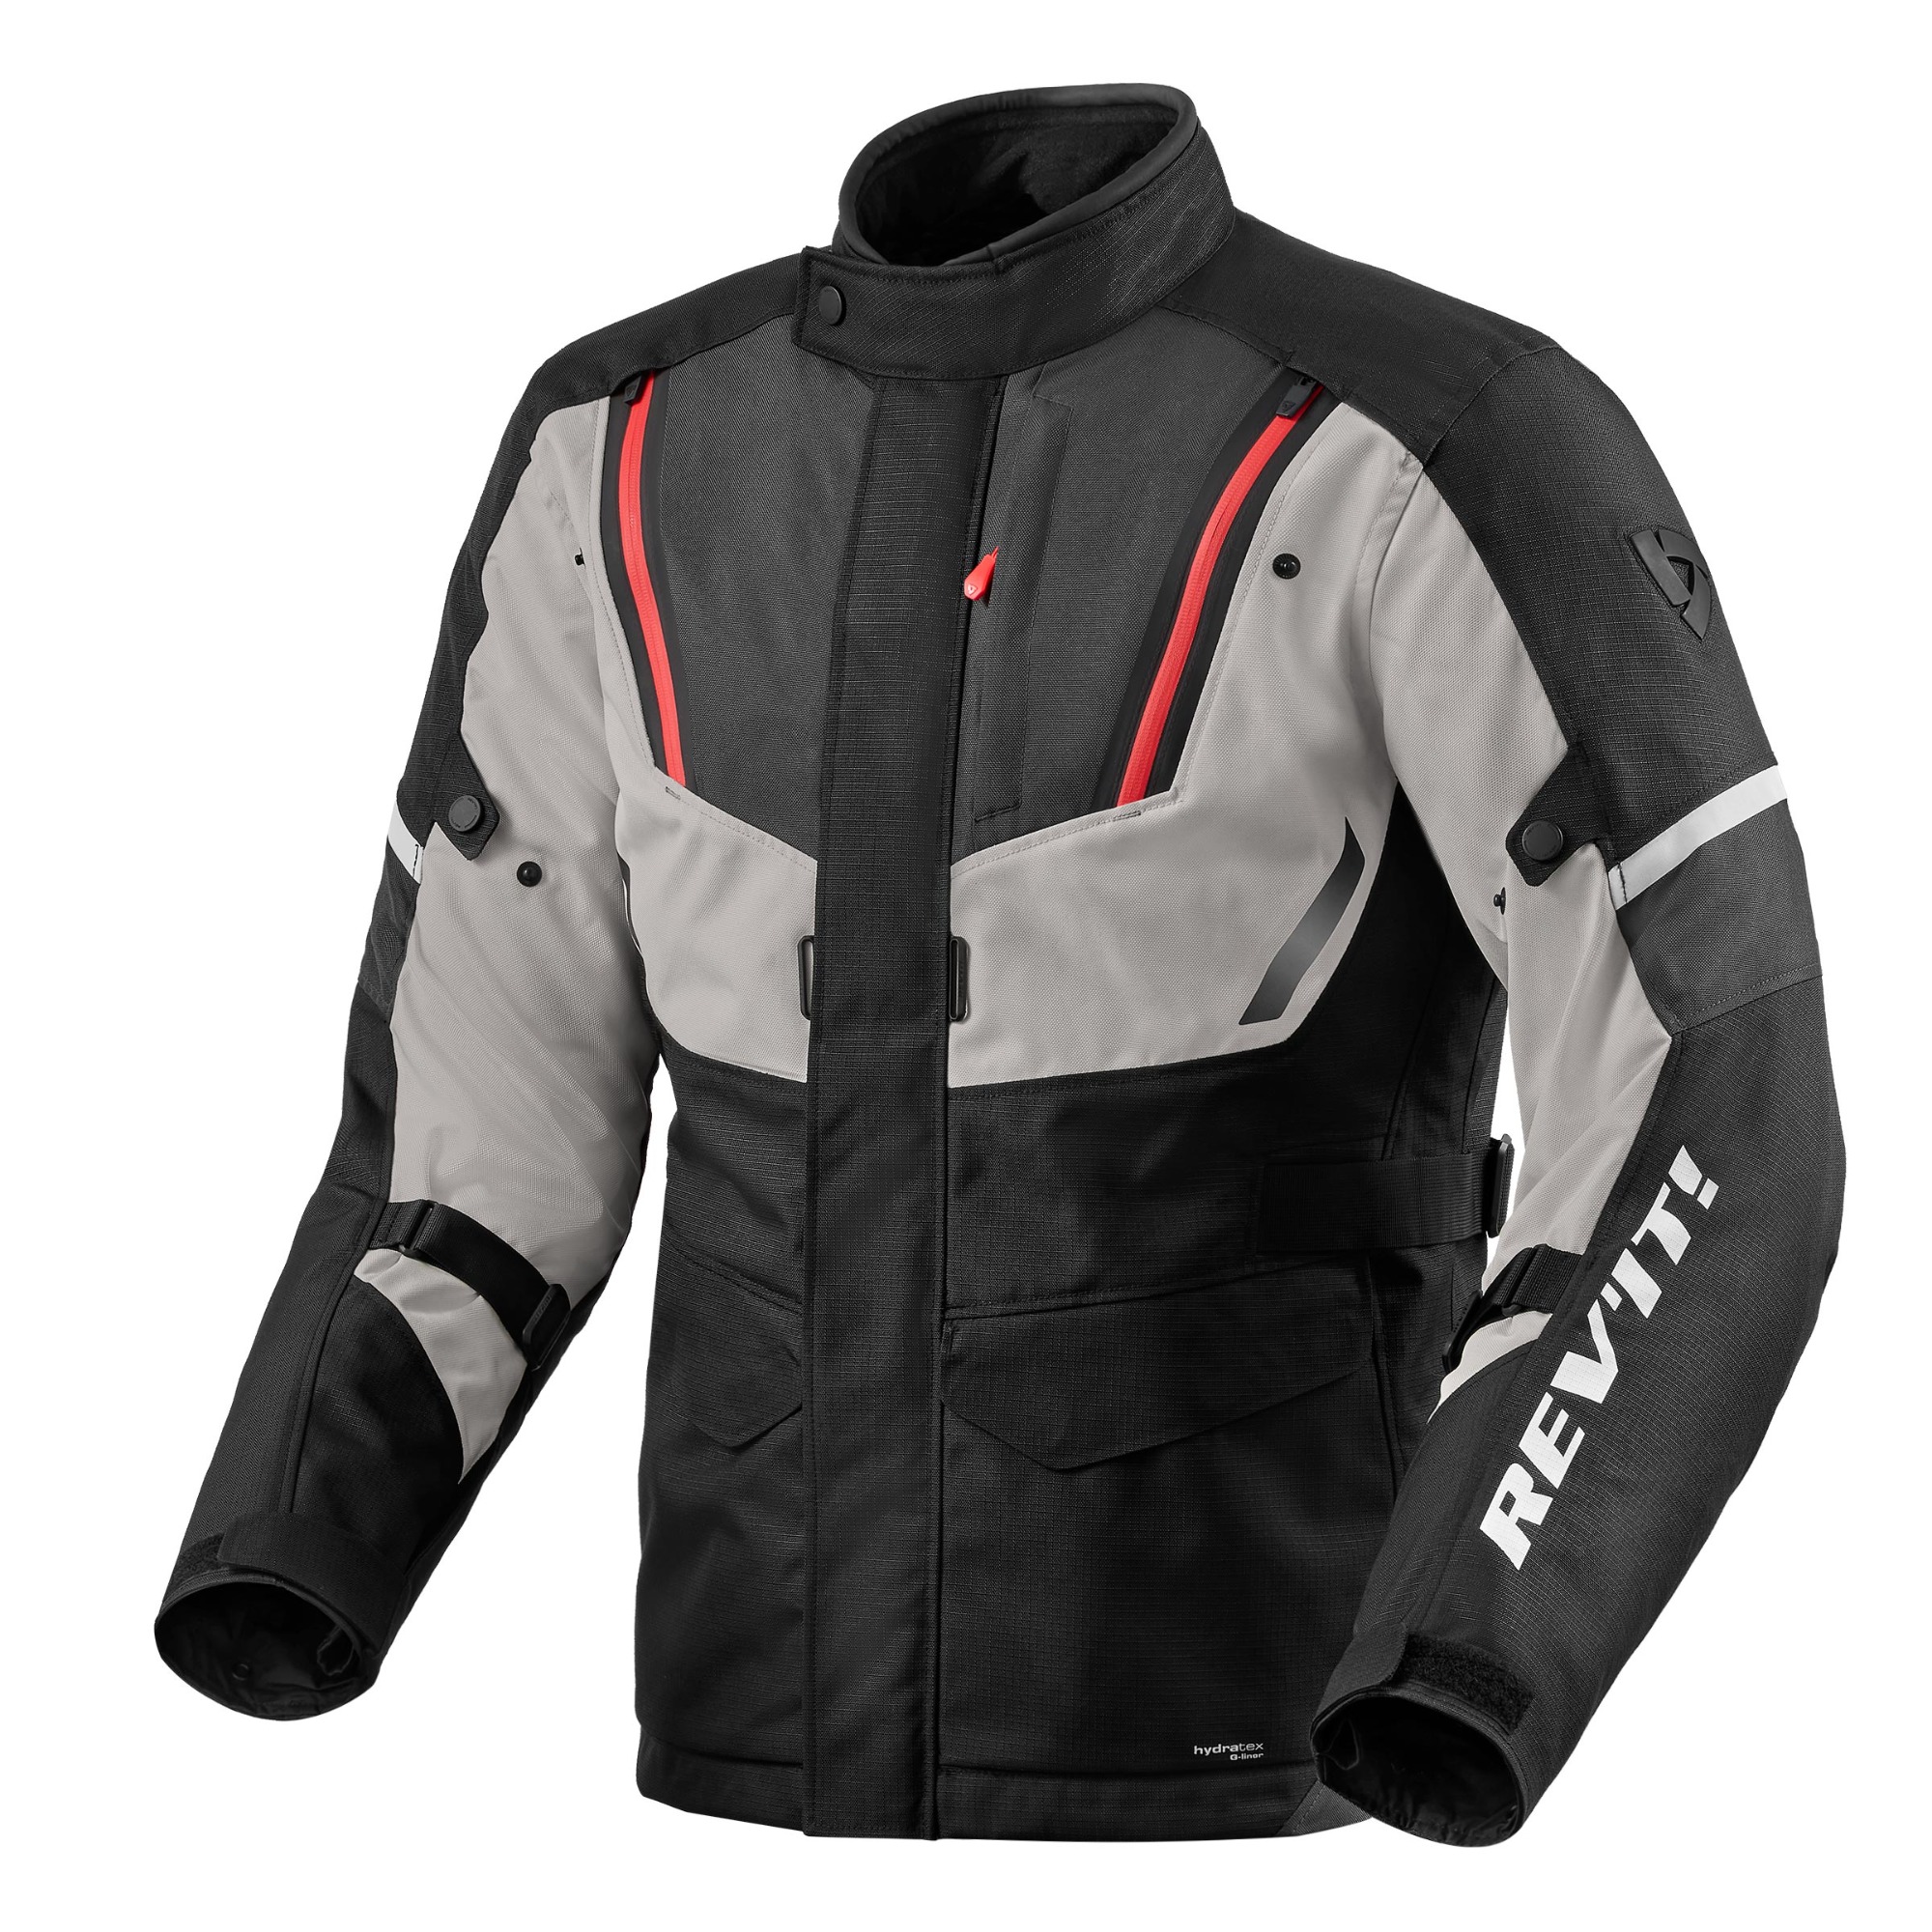 Image of REV'IT! Move H2O Jacket Black Gray Size S ID 8700001332972